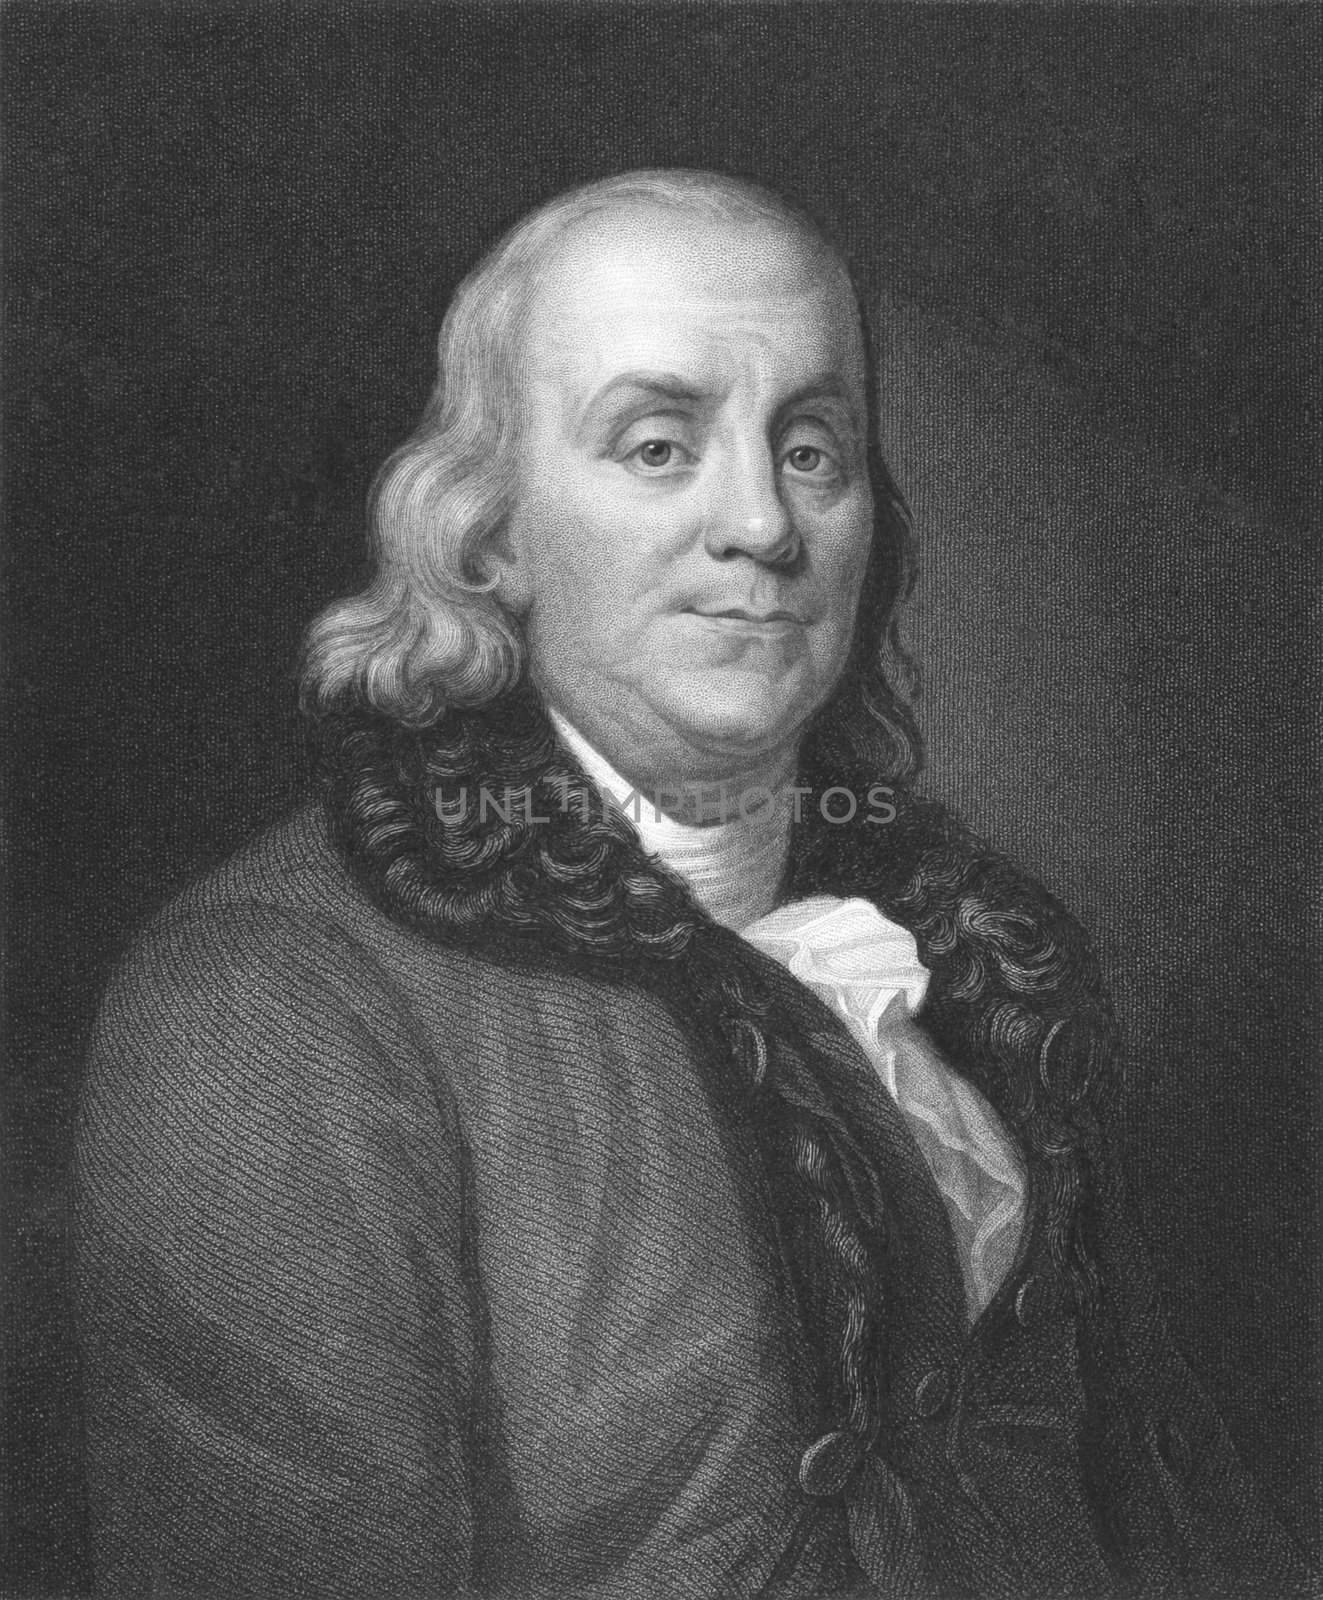 Benjamin Franklin on engraving from the 1850s. One of the founders of the United States of America.